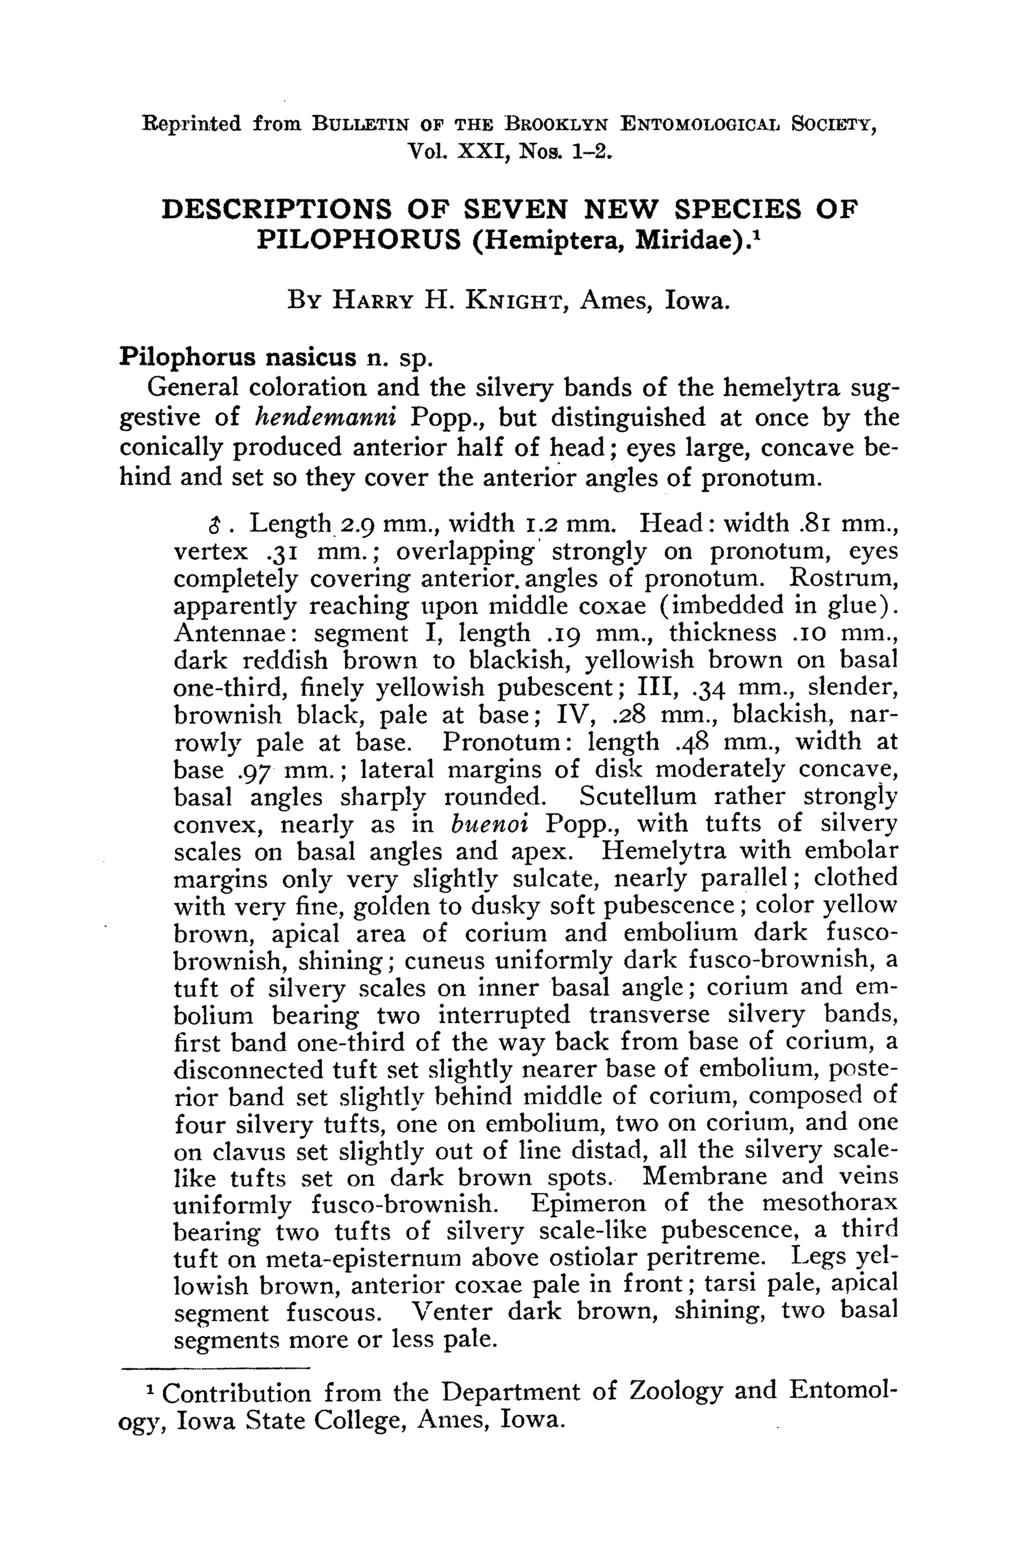 Reprinted from BULLETIN OF THE BROOKLYN ENTOMOLOGICAL SOCIETY, Vol. XXI, Nos. 1-2. DESCRIPTIONS OF SEVEN NEW SPECIES OF PILOPHORUS (Hemiptera, Miridae).1 By HARRY HI. KNIGHT, Ames, Iowa.